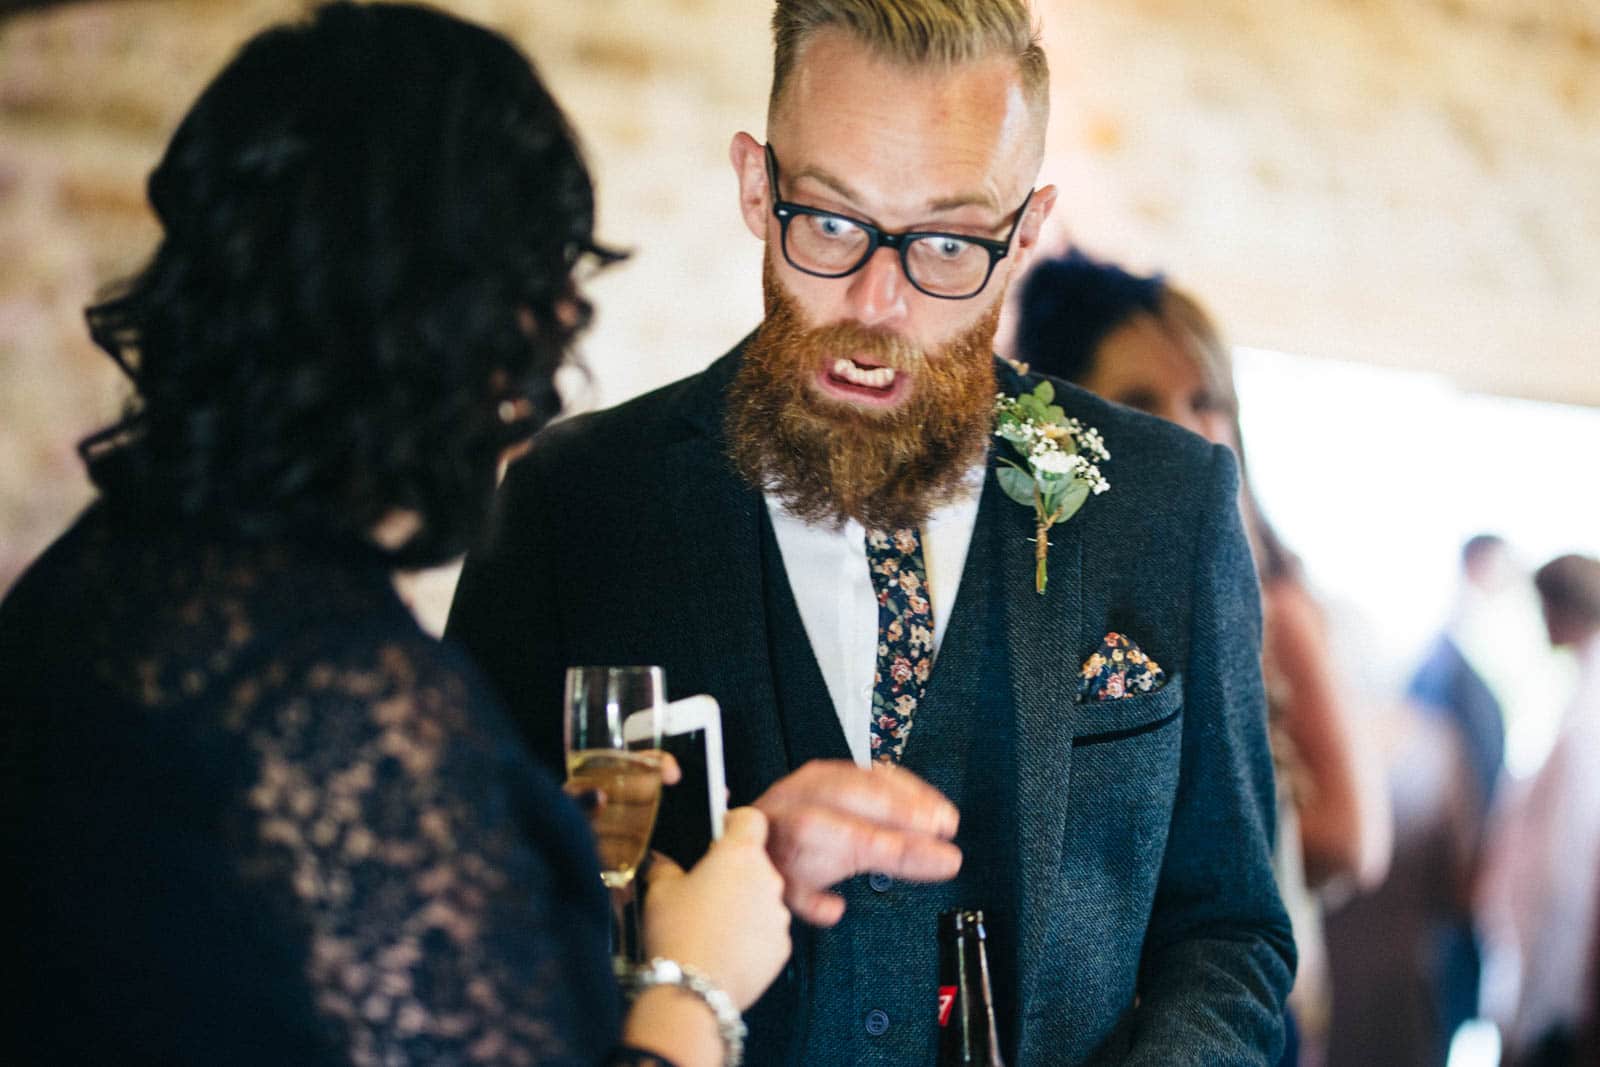 A Dodford Manor Wedding Photographer capturing moments of a bearded man engaged in conversation with another man.